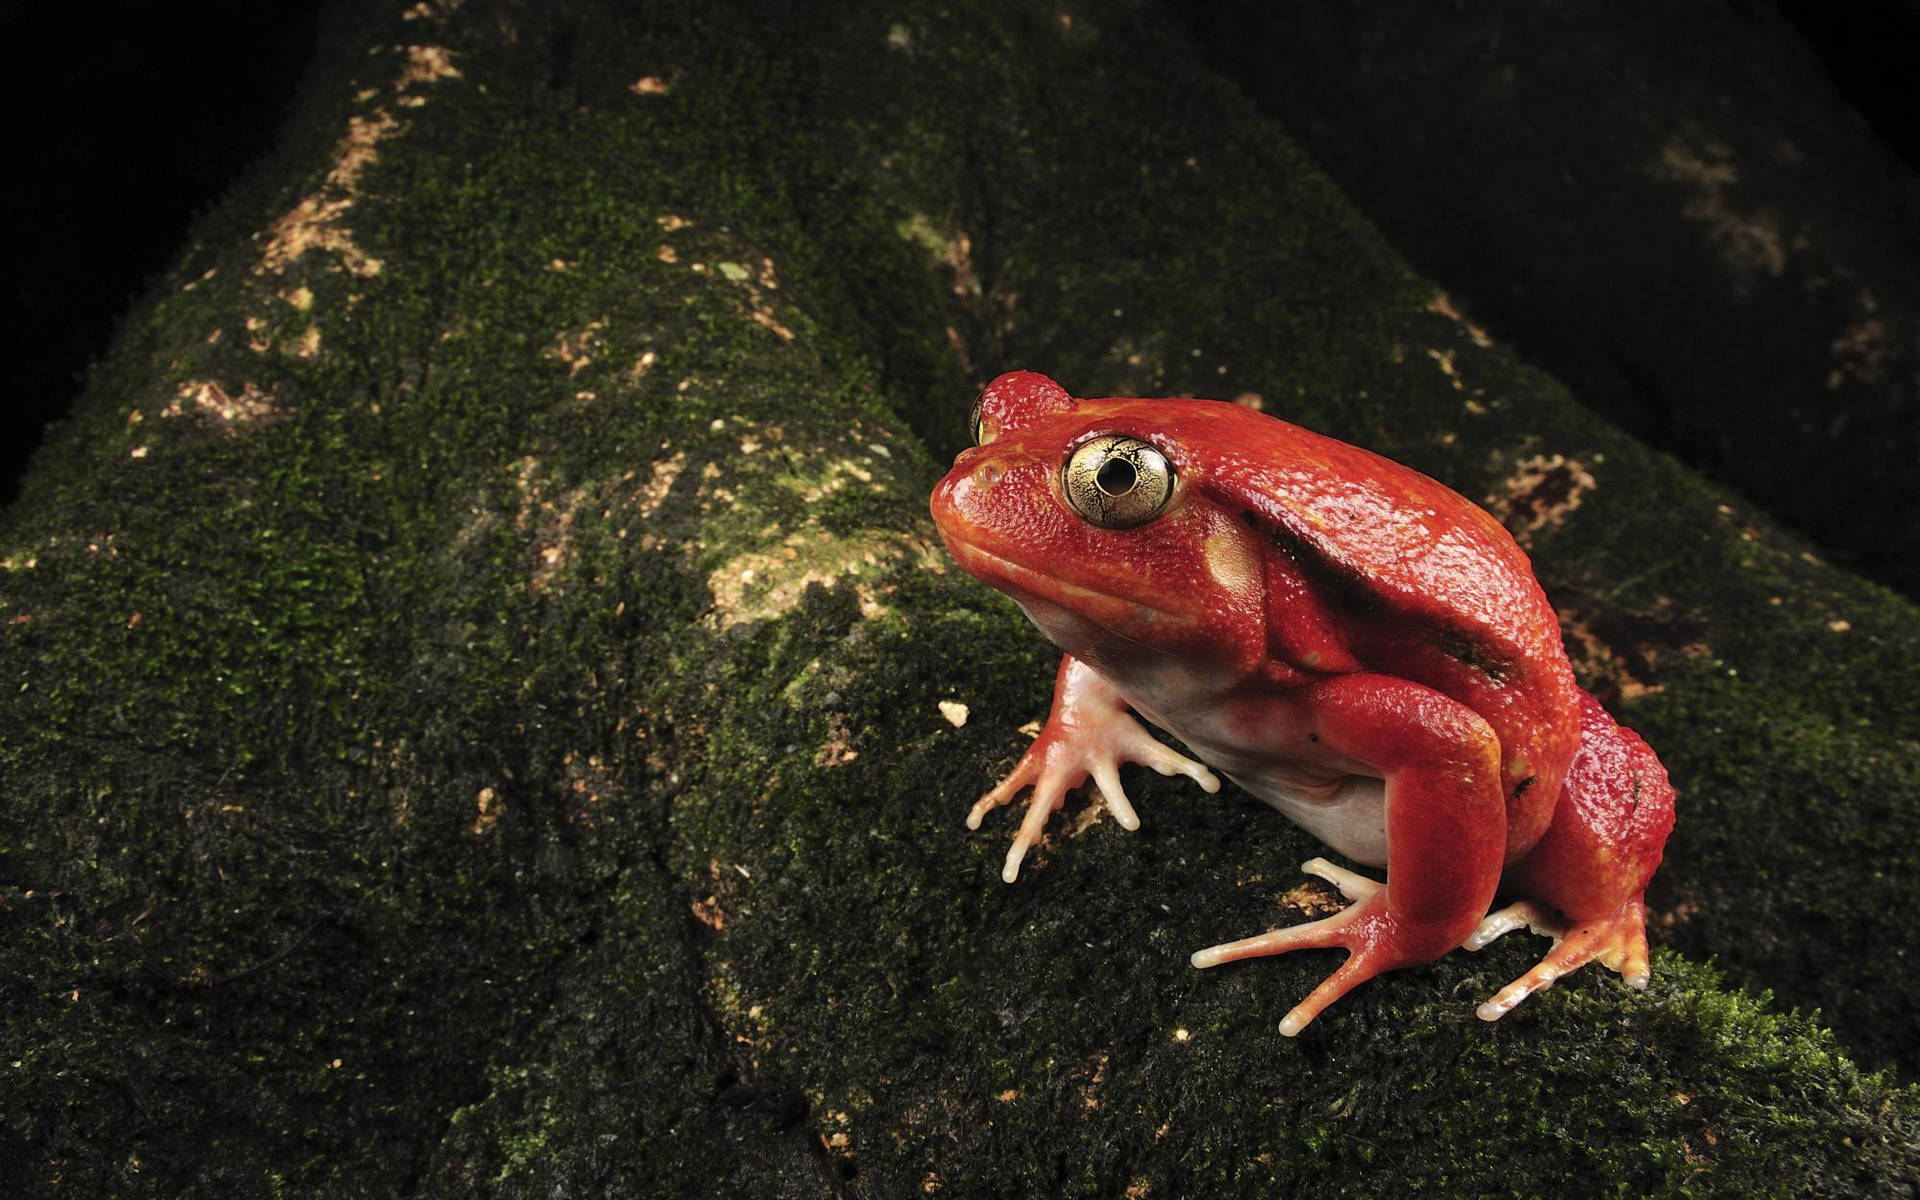 Cute Frog With Red Skin